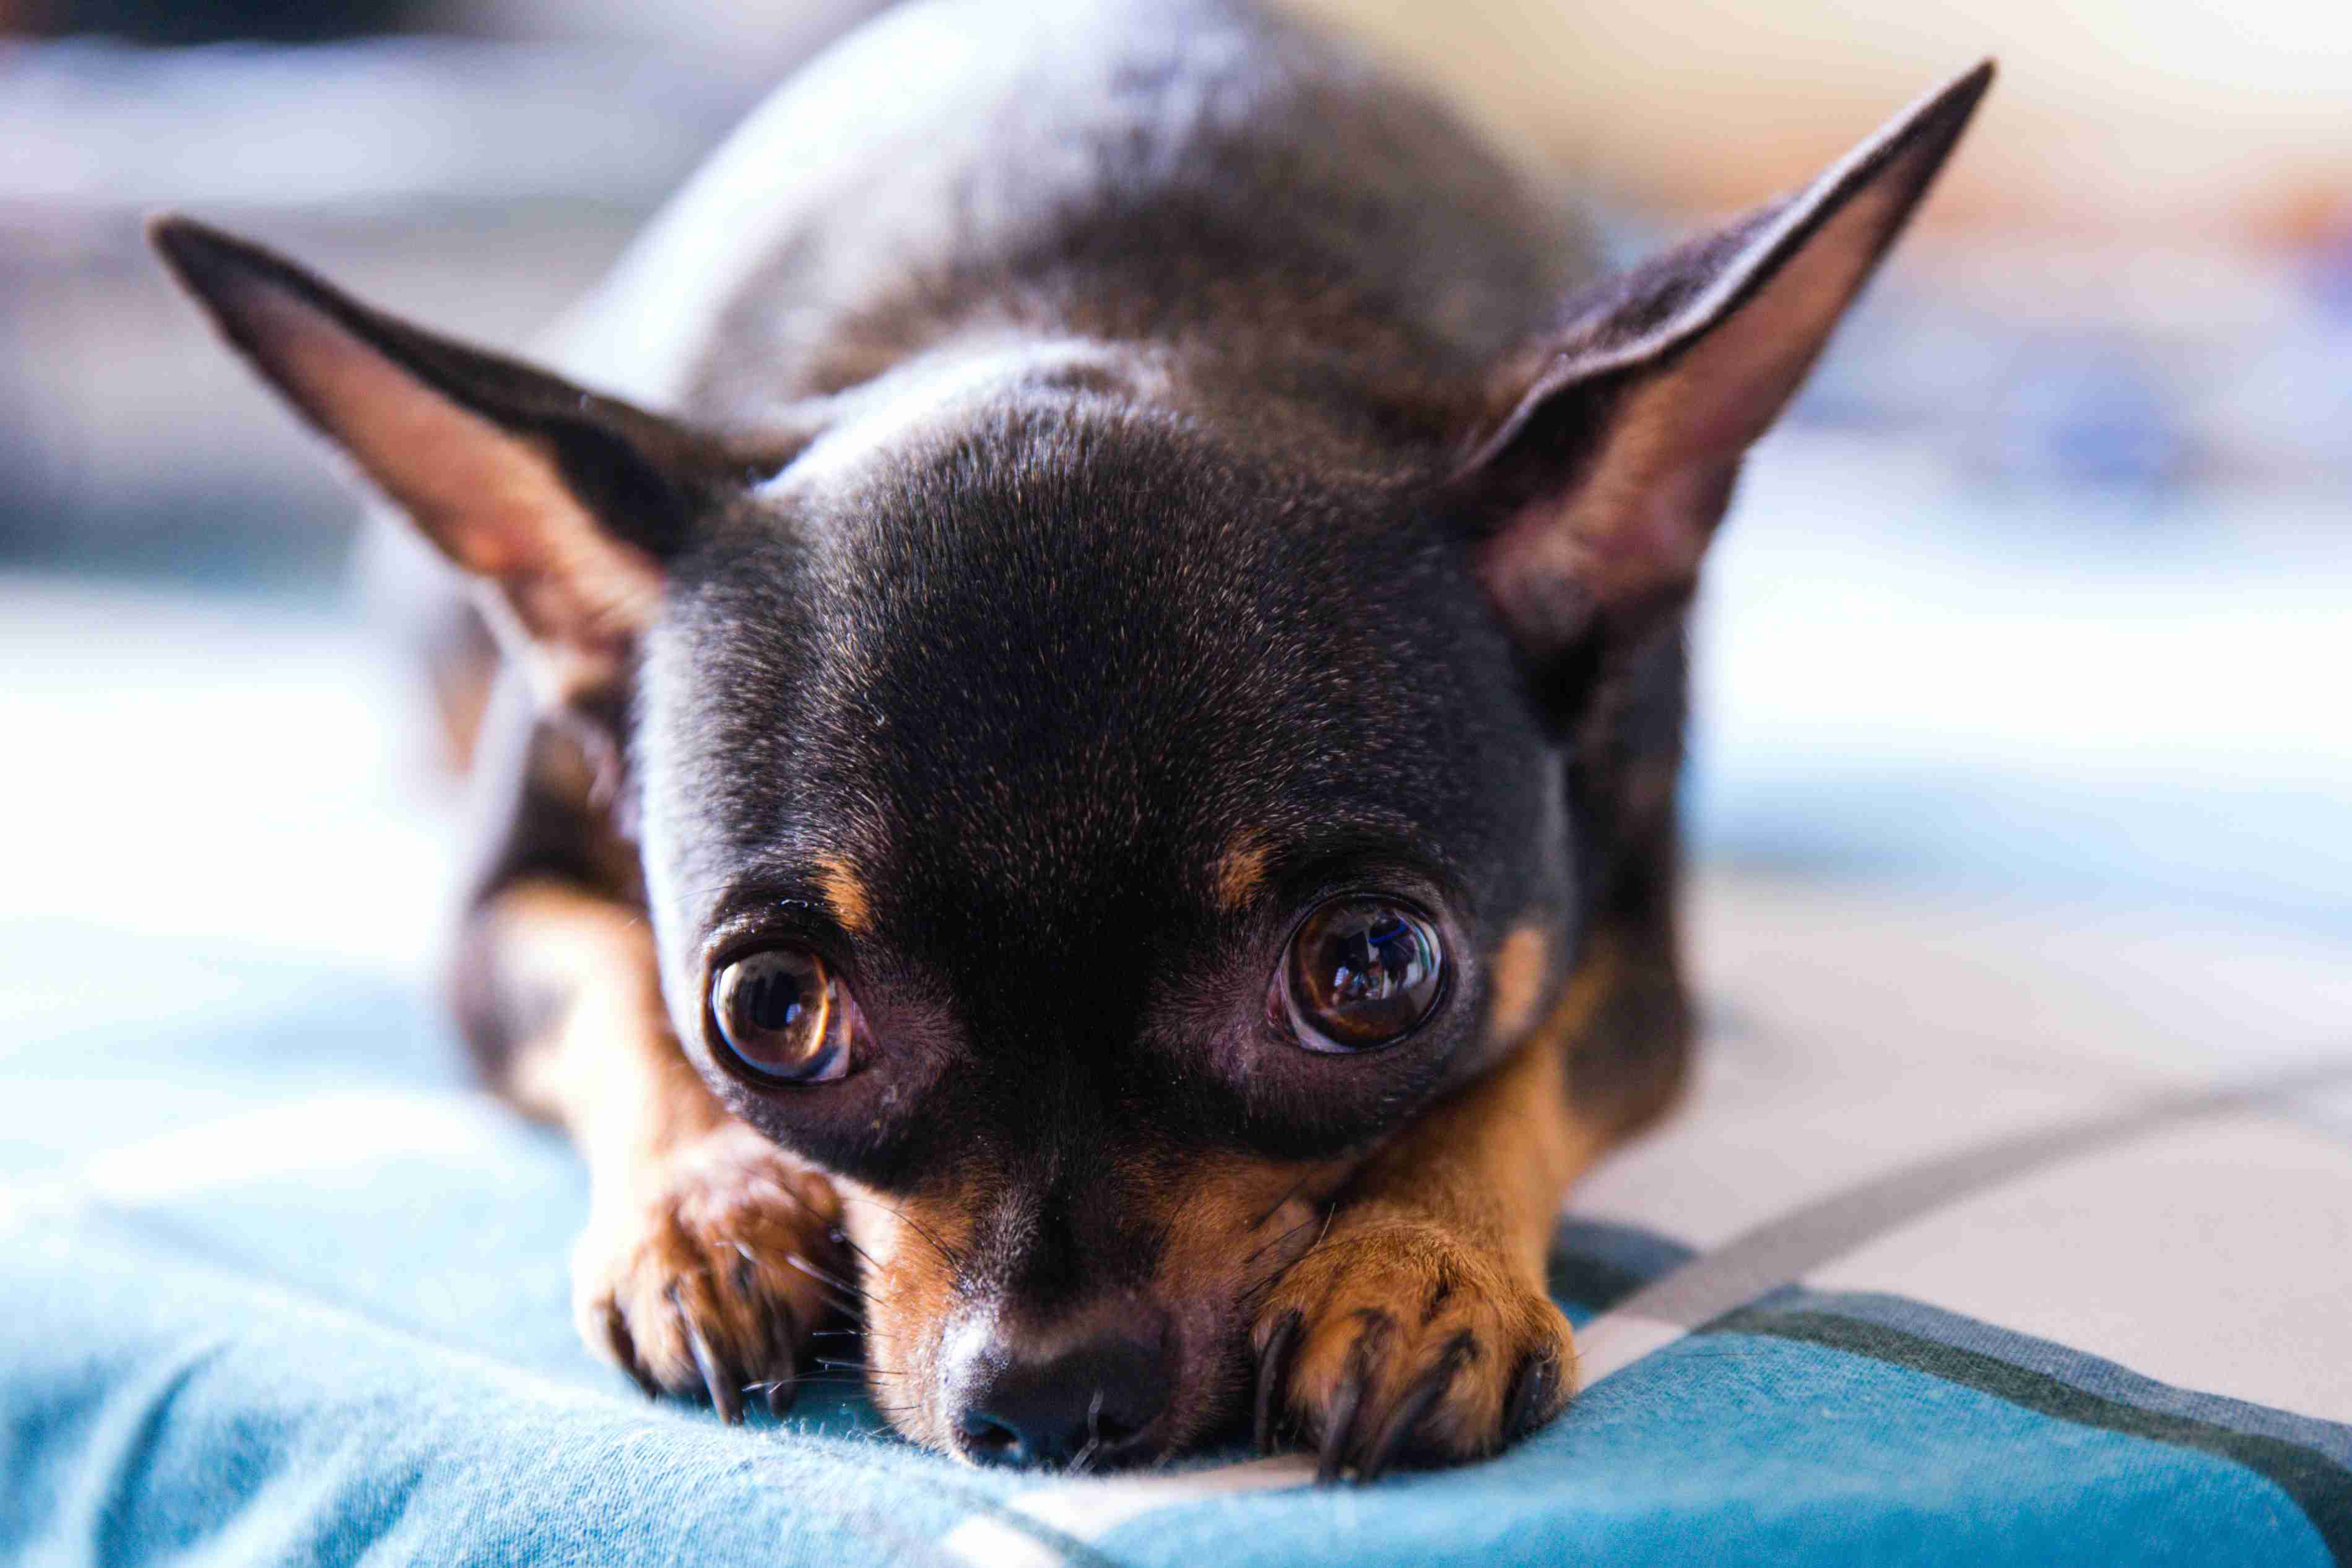 Can anger issues in Chihuahuas be managed through desensitization training?